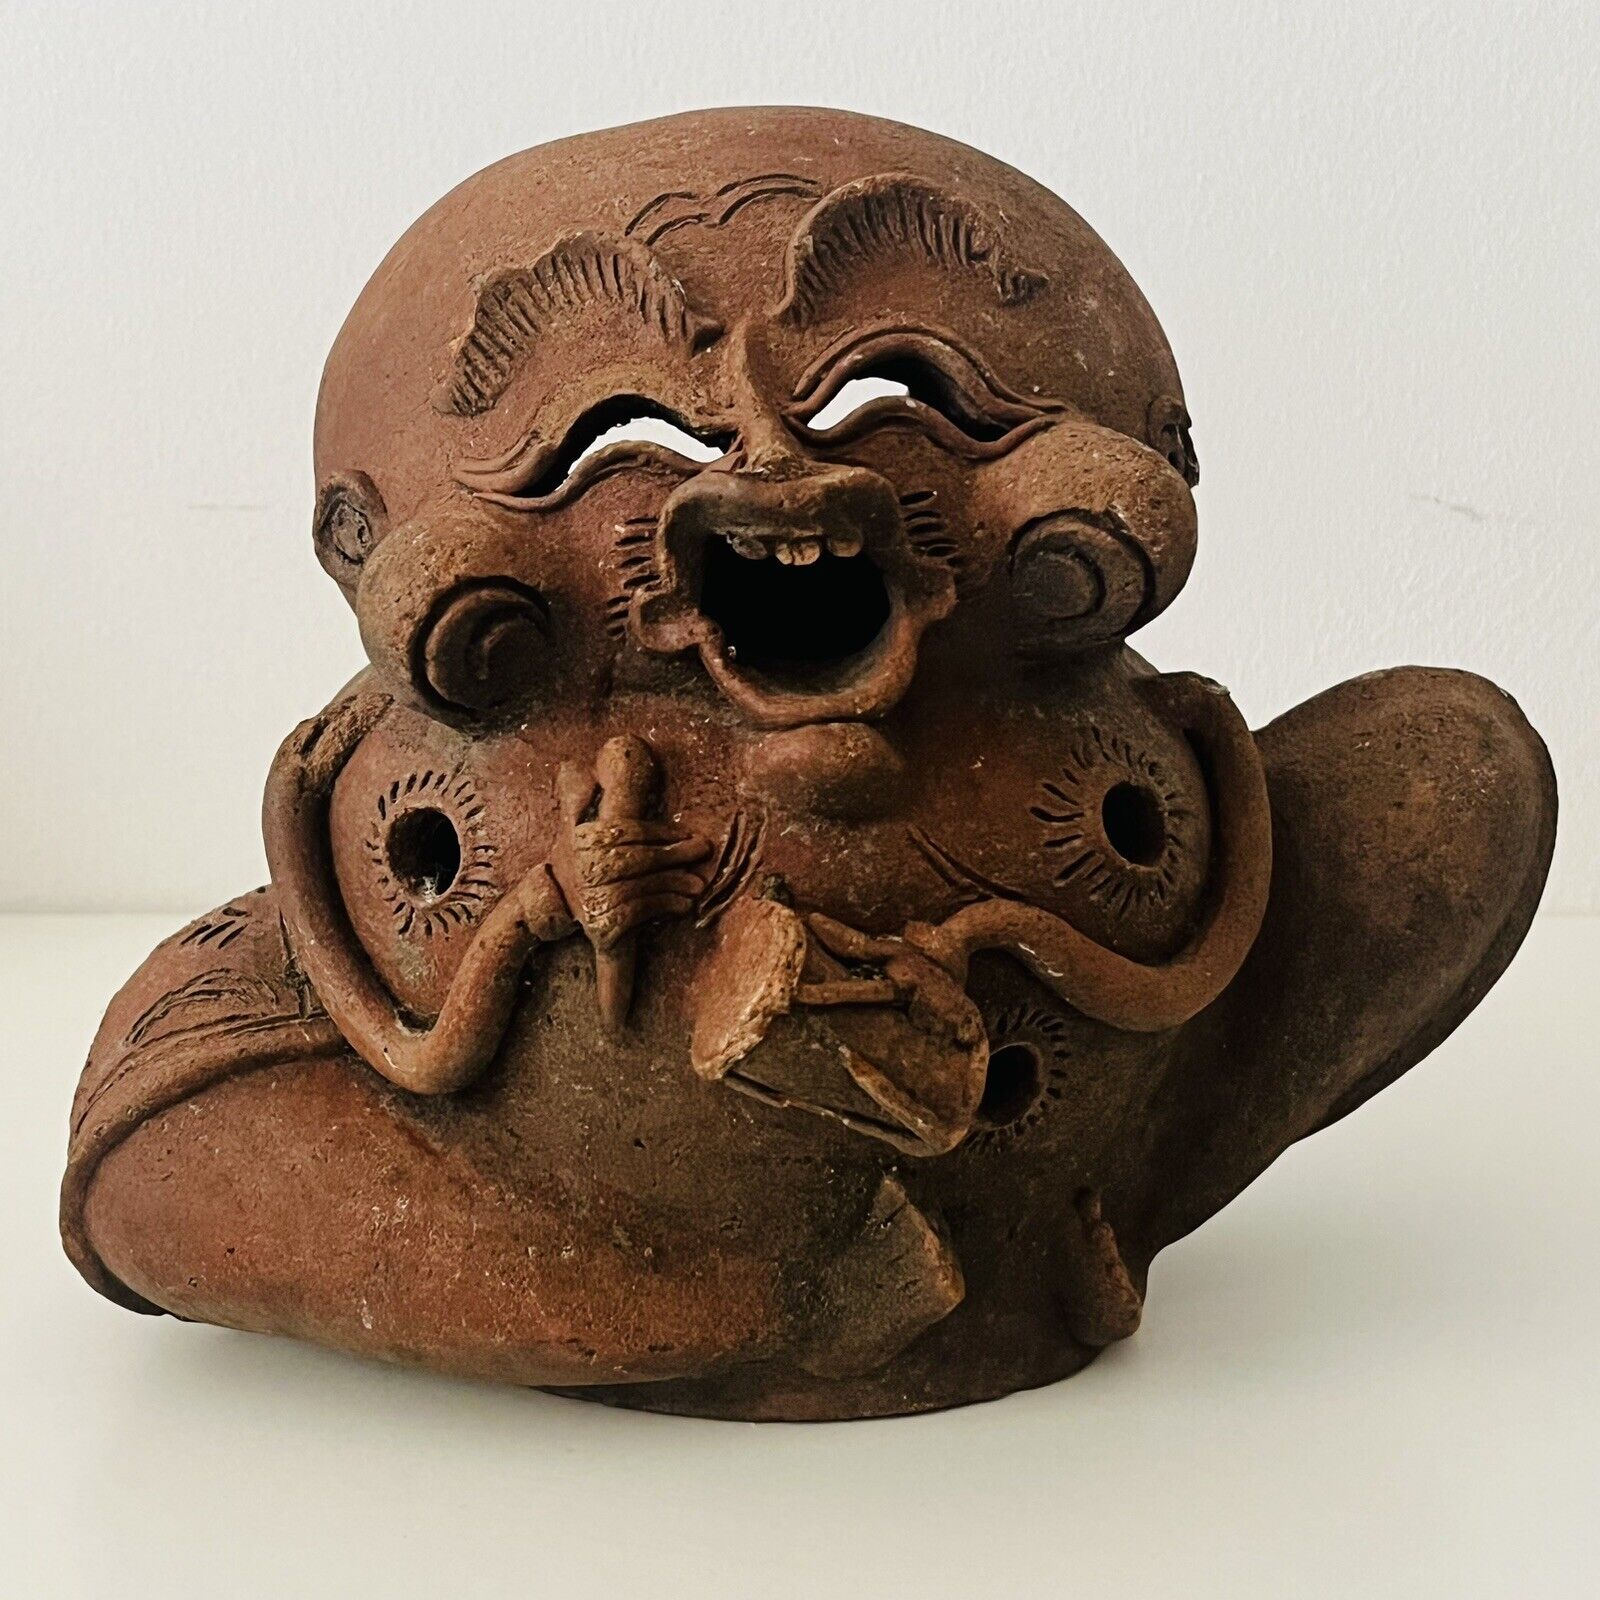 An Unusual Vintage Terracotta Candle Holder Or Figurine of A Laughing Buddha